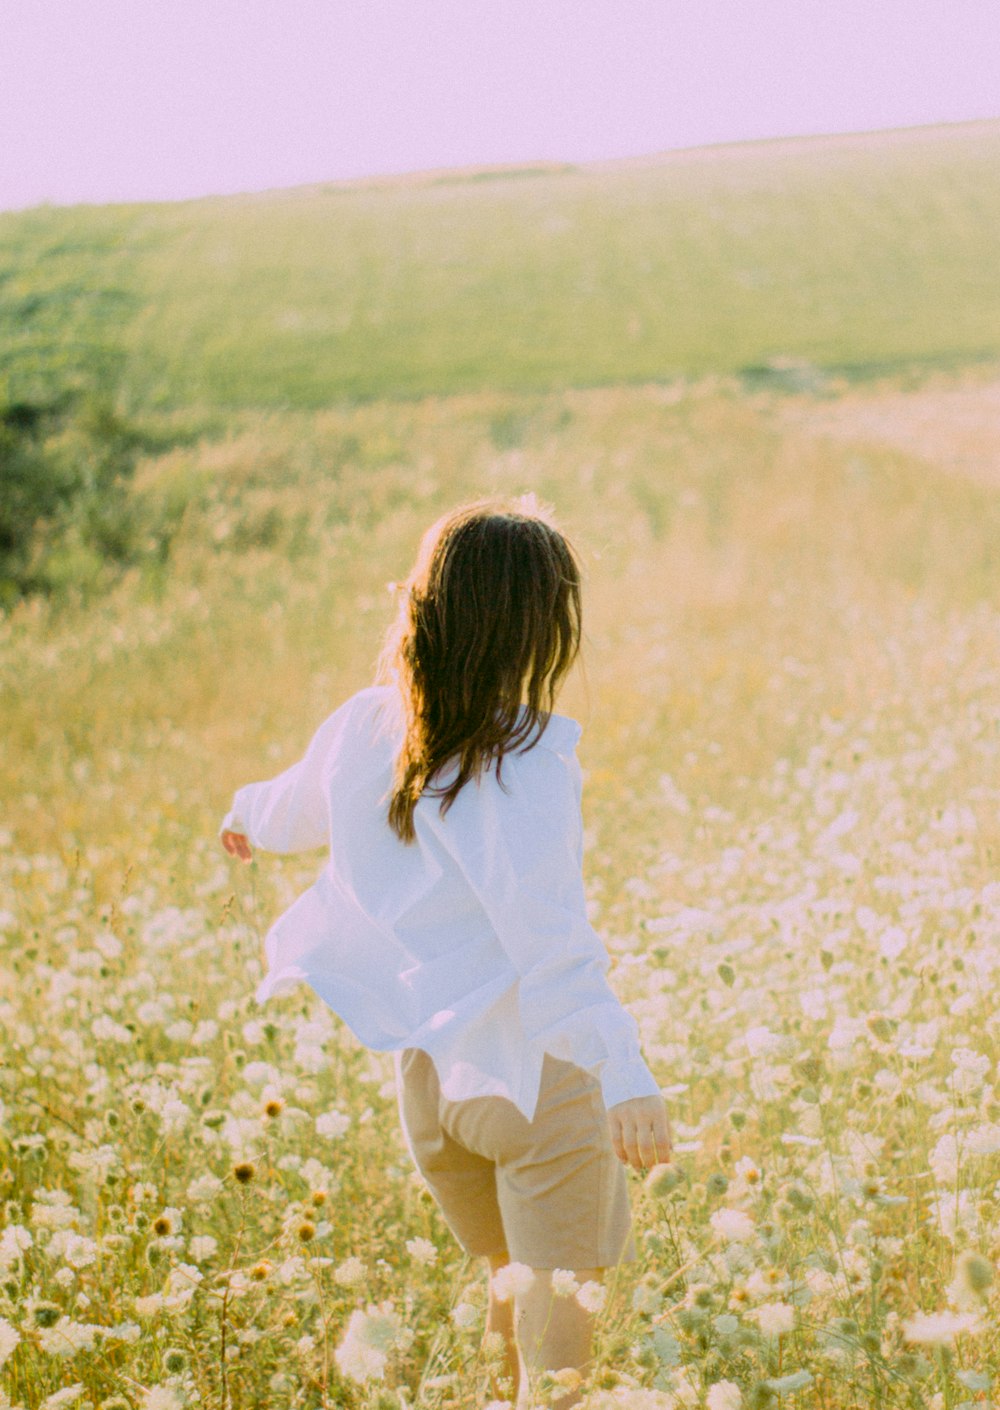 woman in white dress shirt and brown pants walking on yellow flower field during daytime